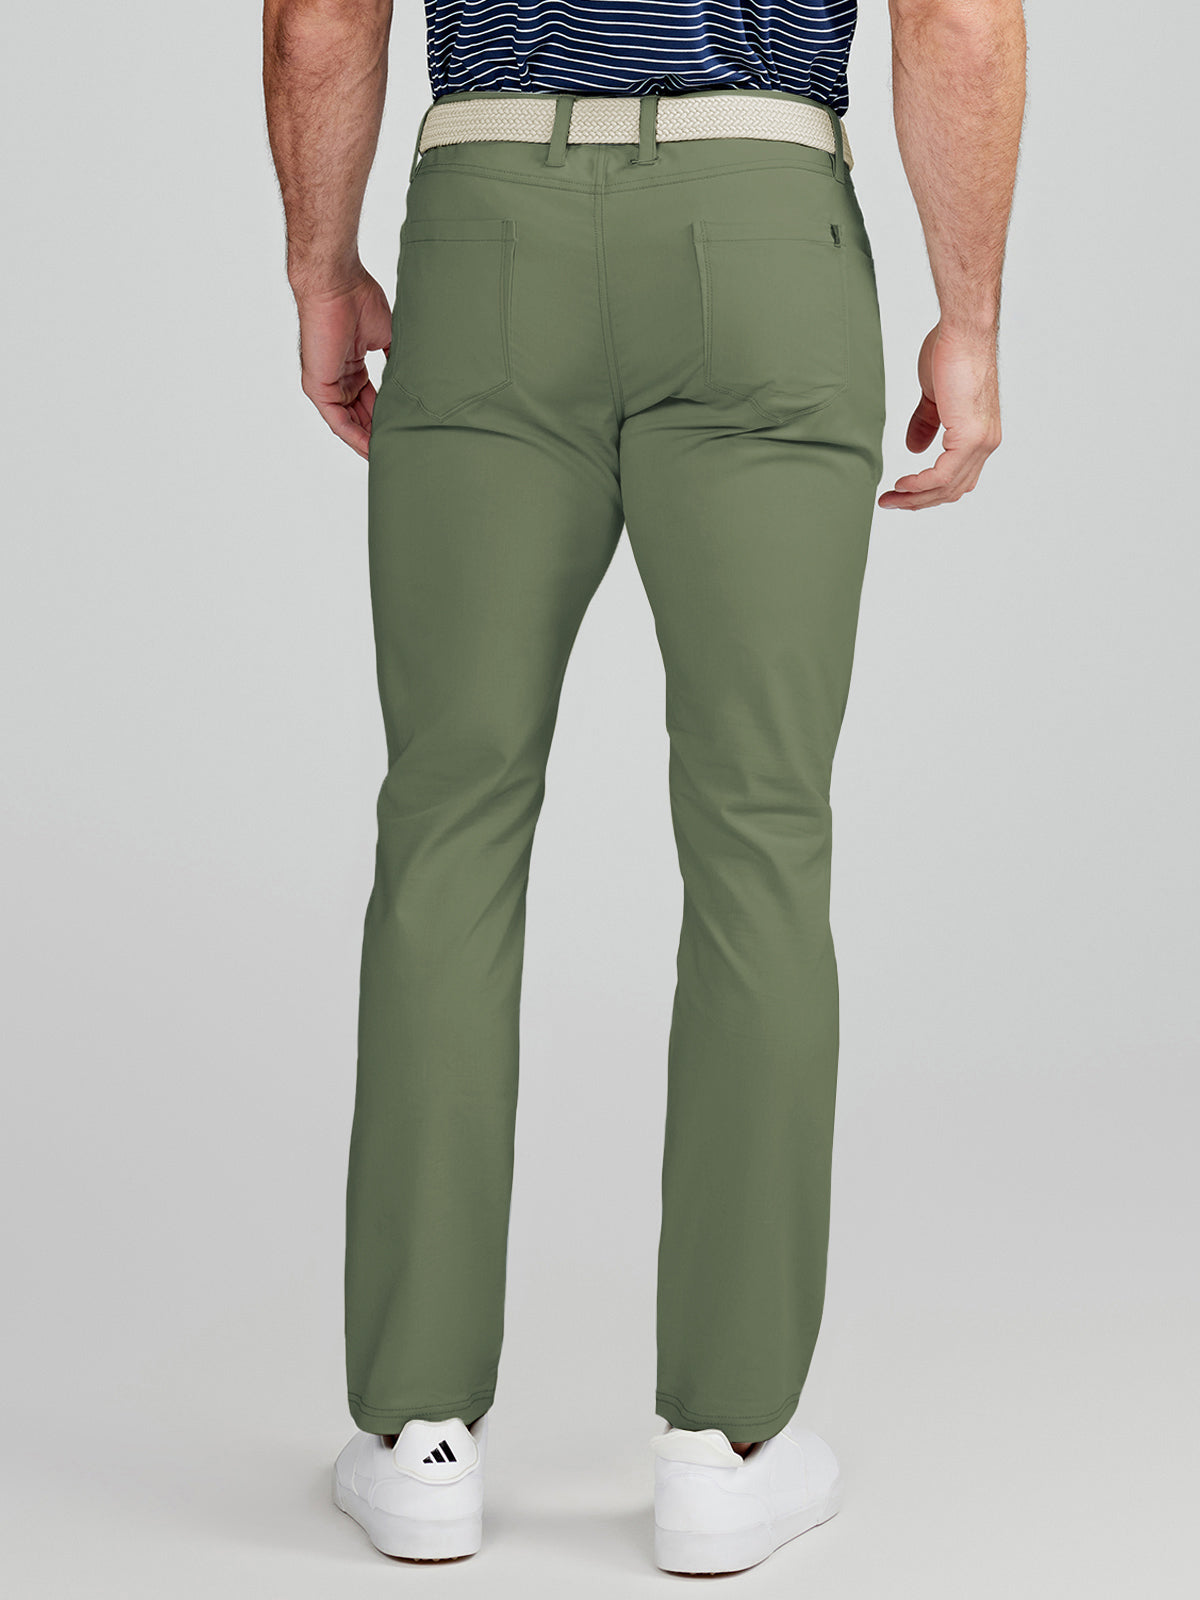 Motion Pant Tailored Fit - tasc performance (Olive)